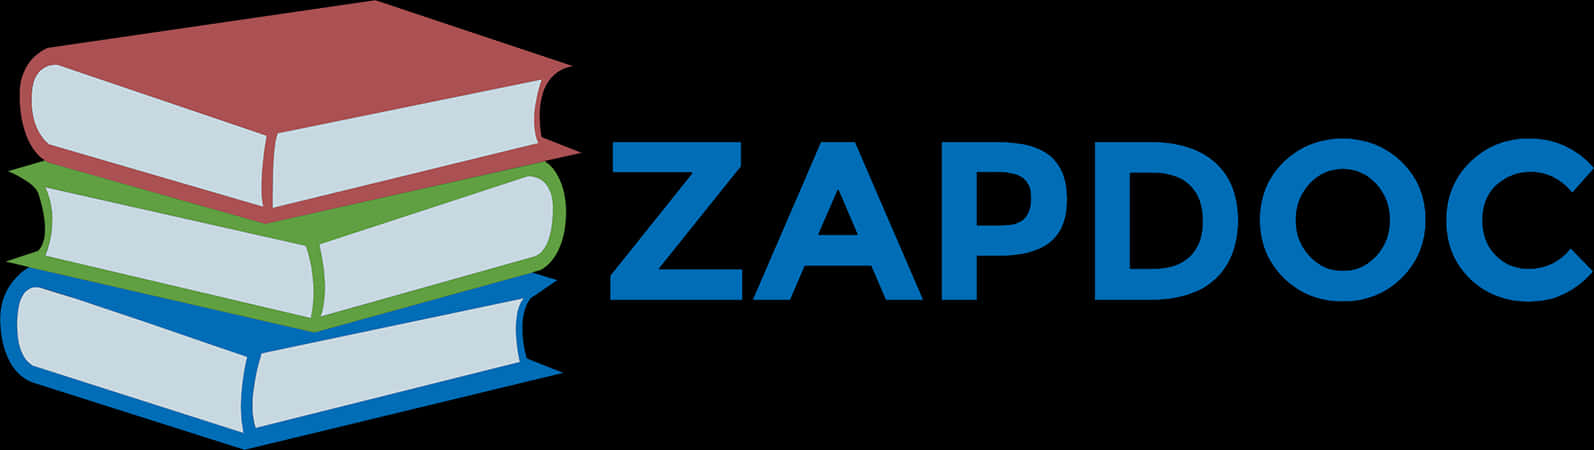 Zapdoc Book Logo Graphic PNG